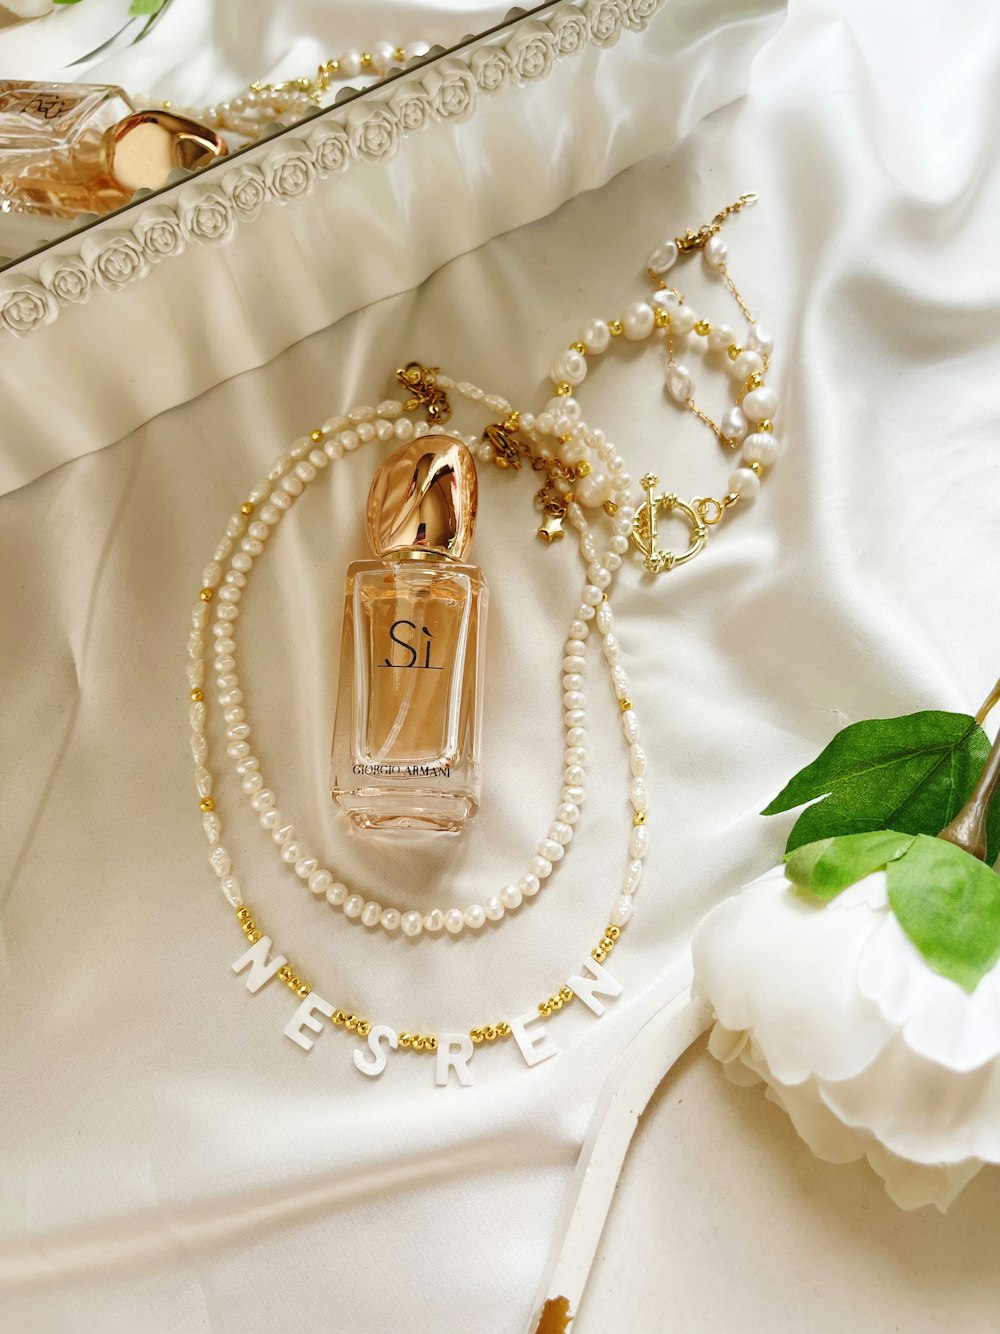 a necklace with pearls and a bottle of perfume